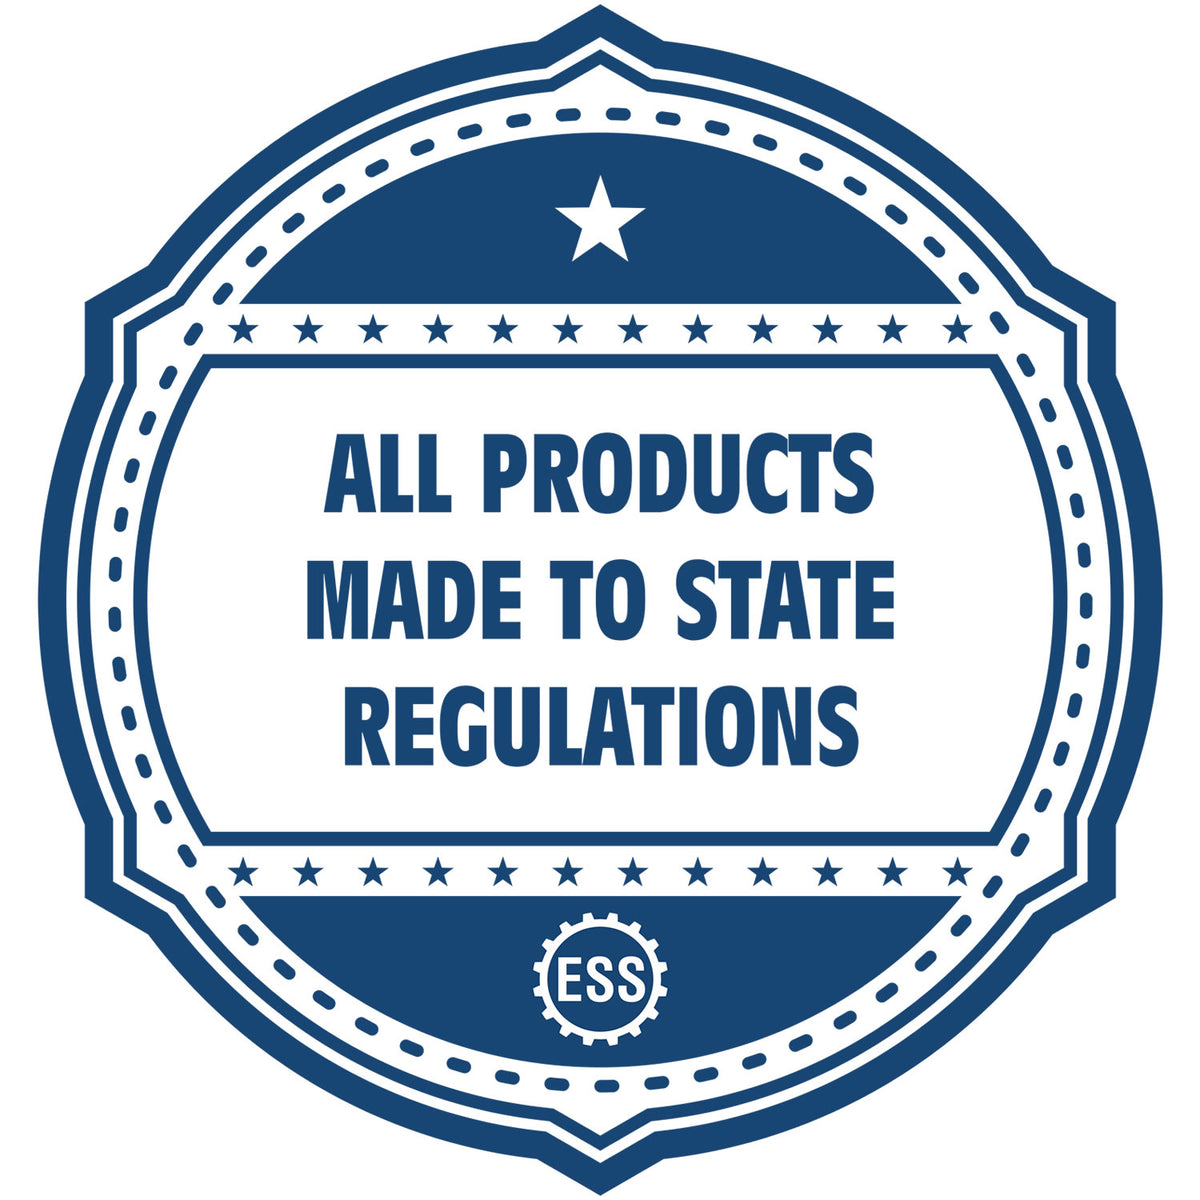 An icon or badge element for the Slim Pre-Inked Rectangular Notary Stamp for Missouri showing that this product is made in compliance with state regulations.